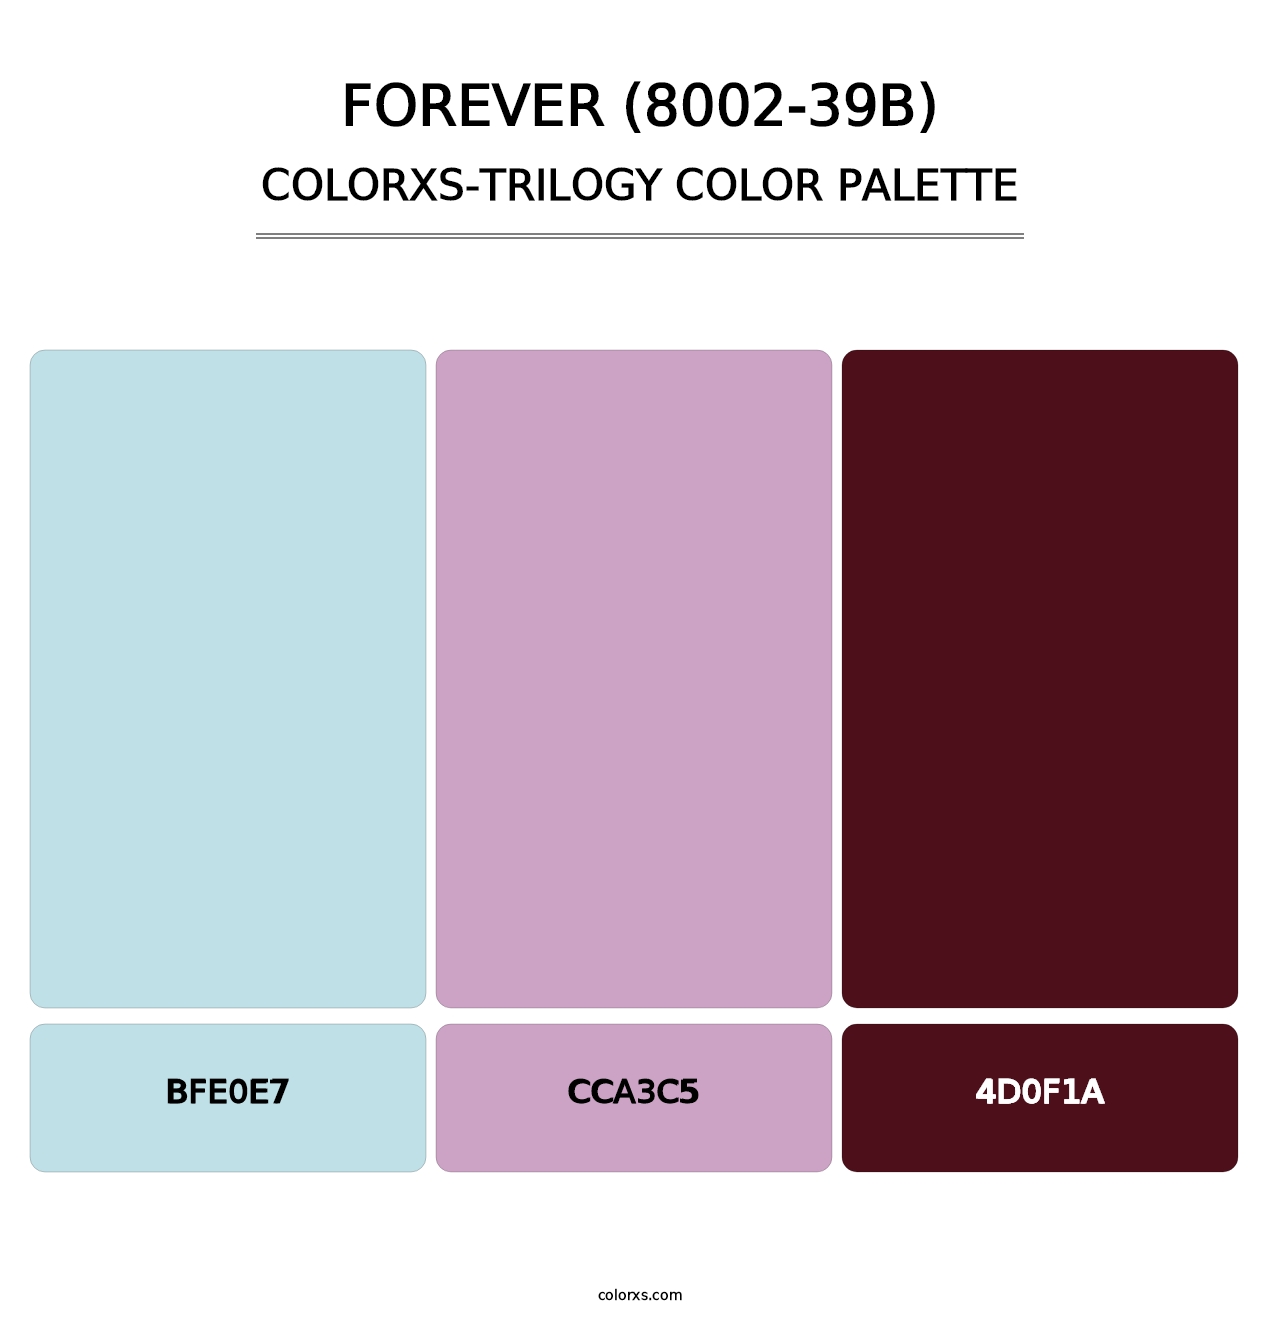 Forever (8002-39B) - Colorxs Trilogy Palette